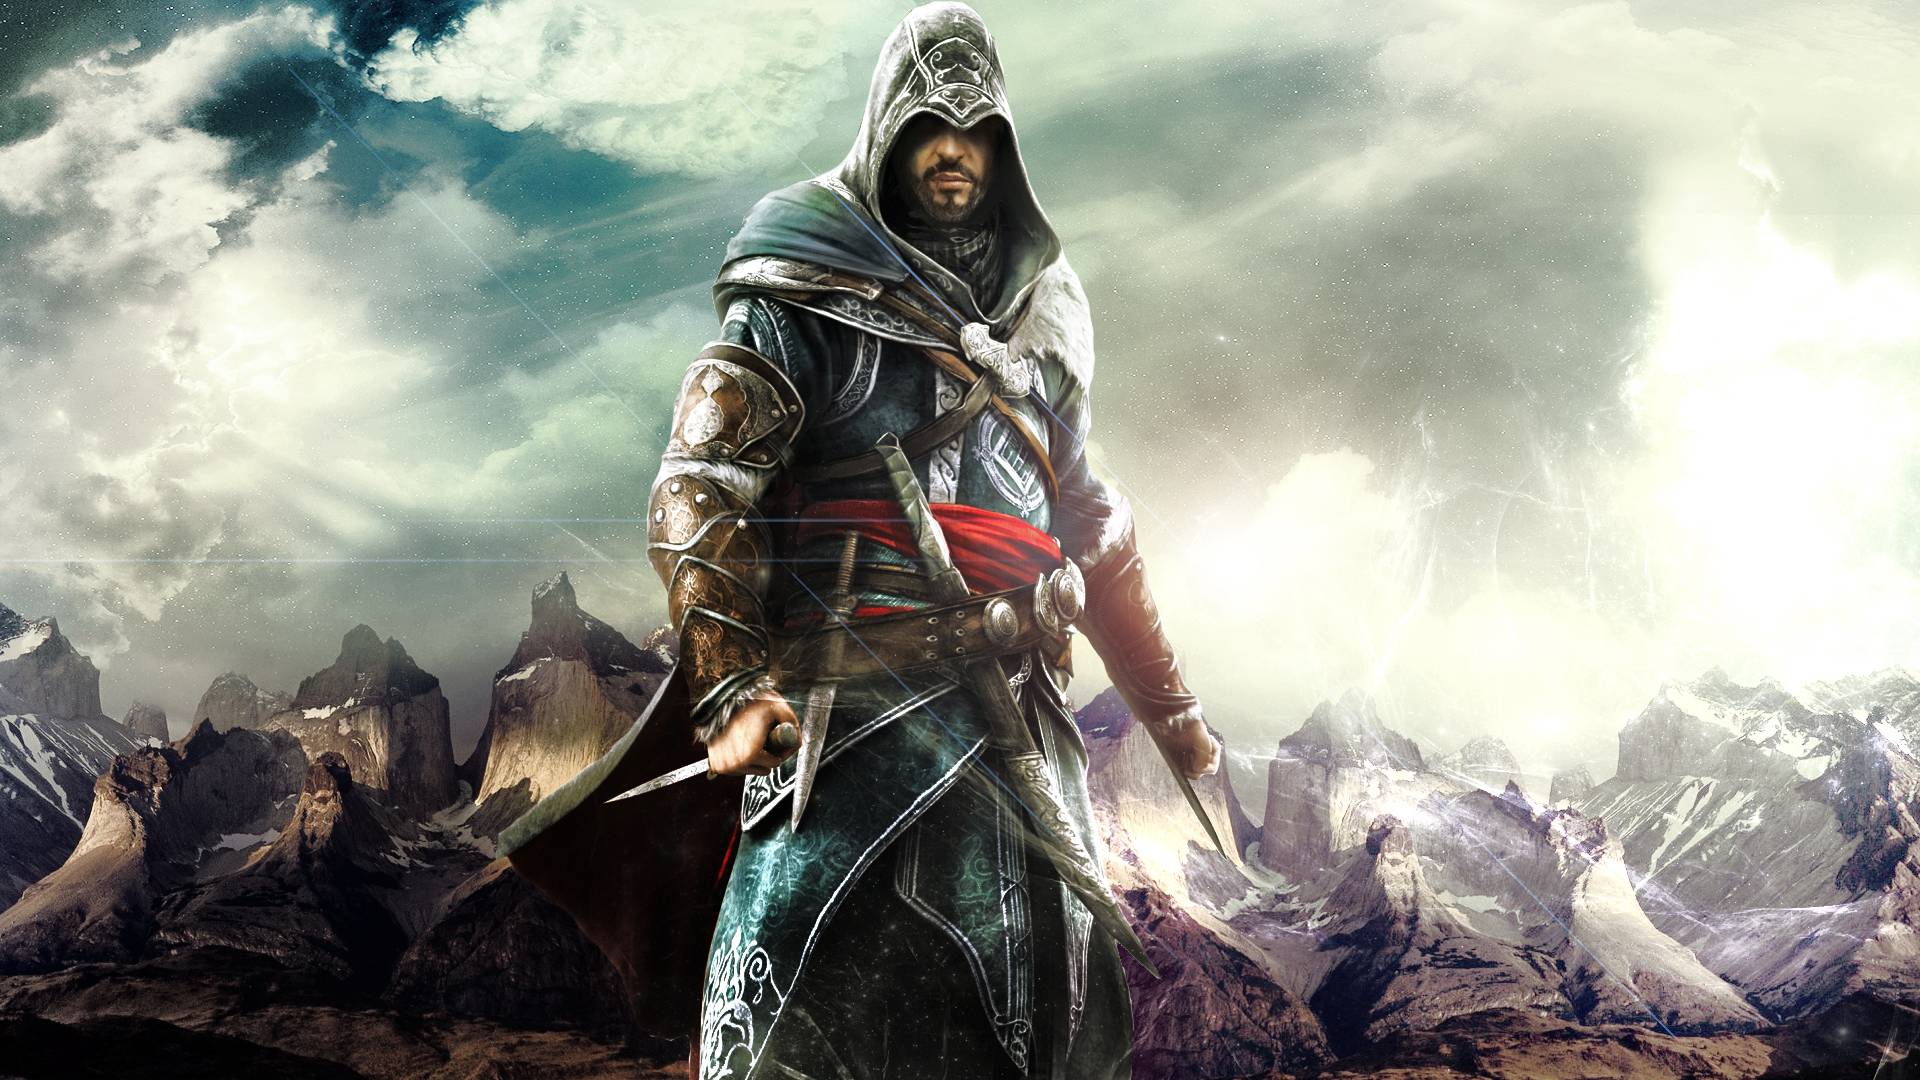 Assassin&Creed Revelations Wallpapers